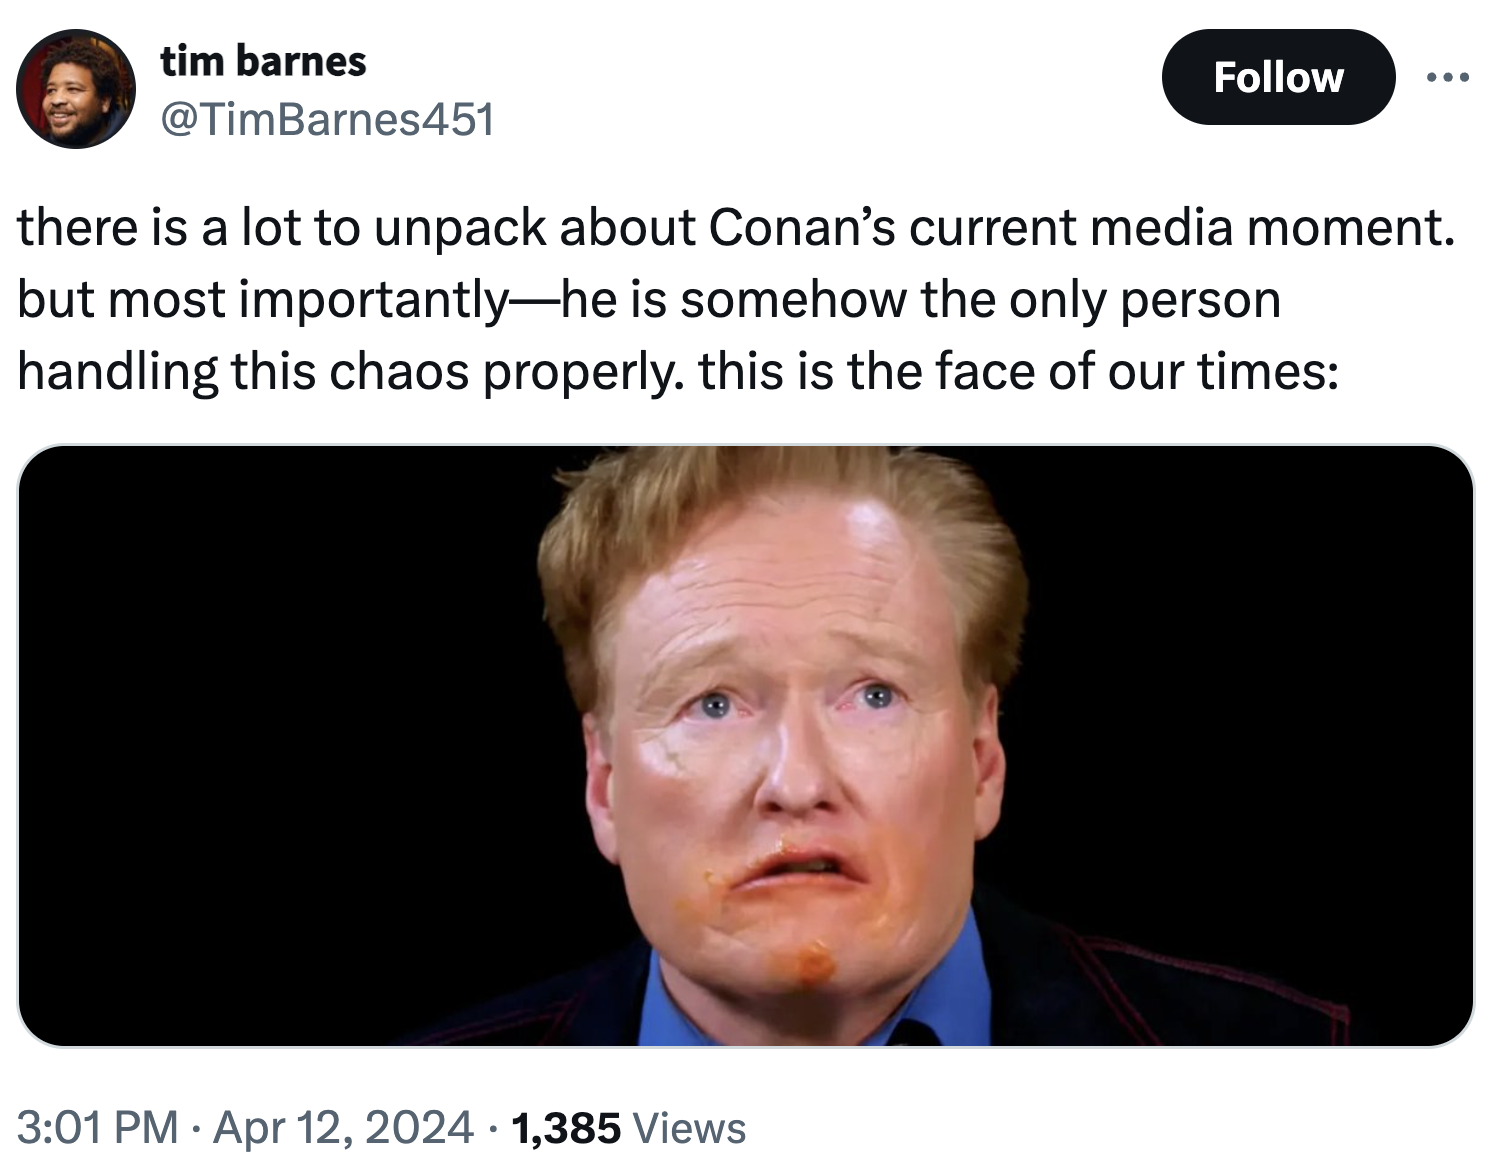 screenshot - tim barnes there is a lot to unpack about Conan's current media moment. but most importantlyhe is somehow the only person handling this chaos properly. this is the face of our times 1,385 Views